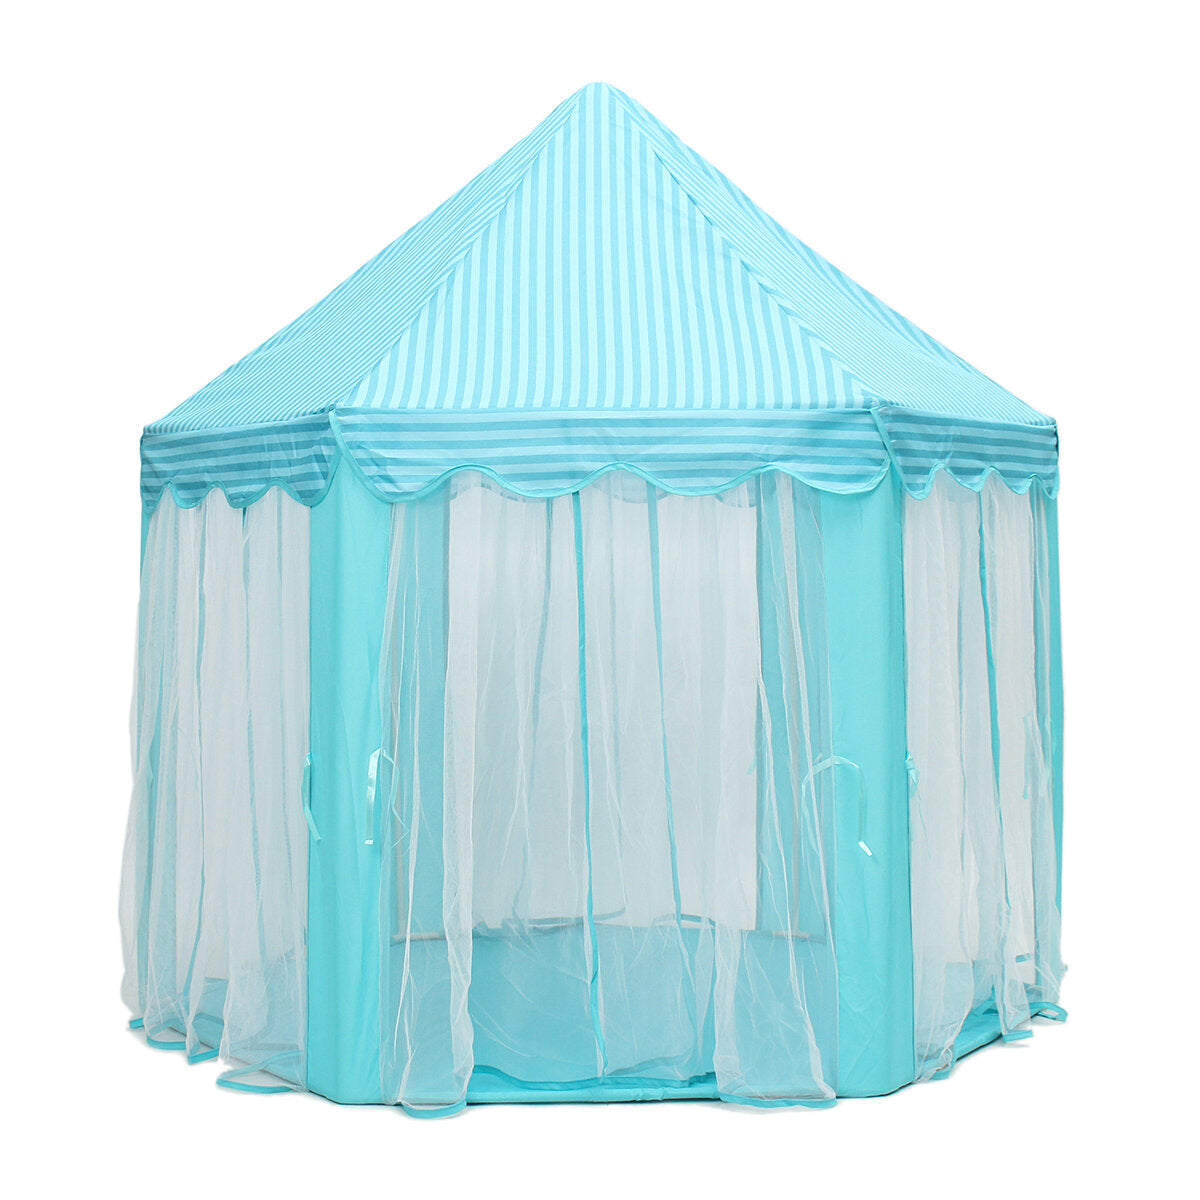 140cm Kids Foldable&Portable Tent Play Castle Garden Outdoor Indoor Playhouse Children Game Tent Baby Gift